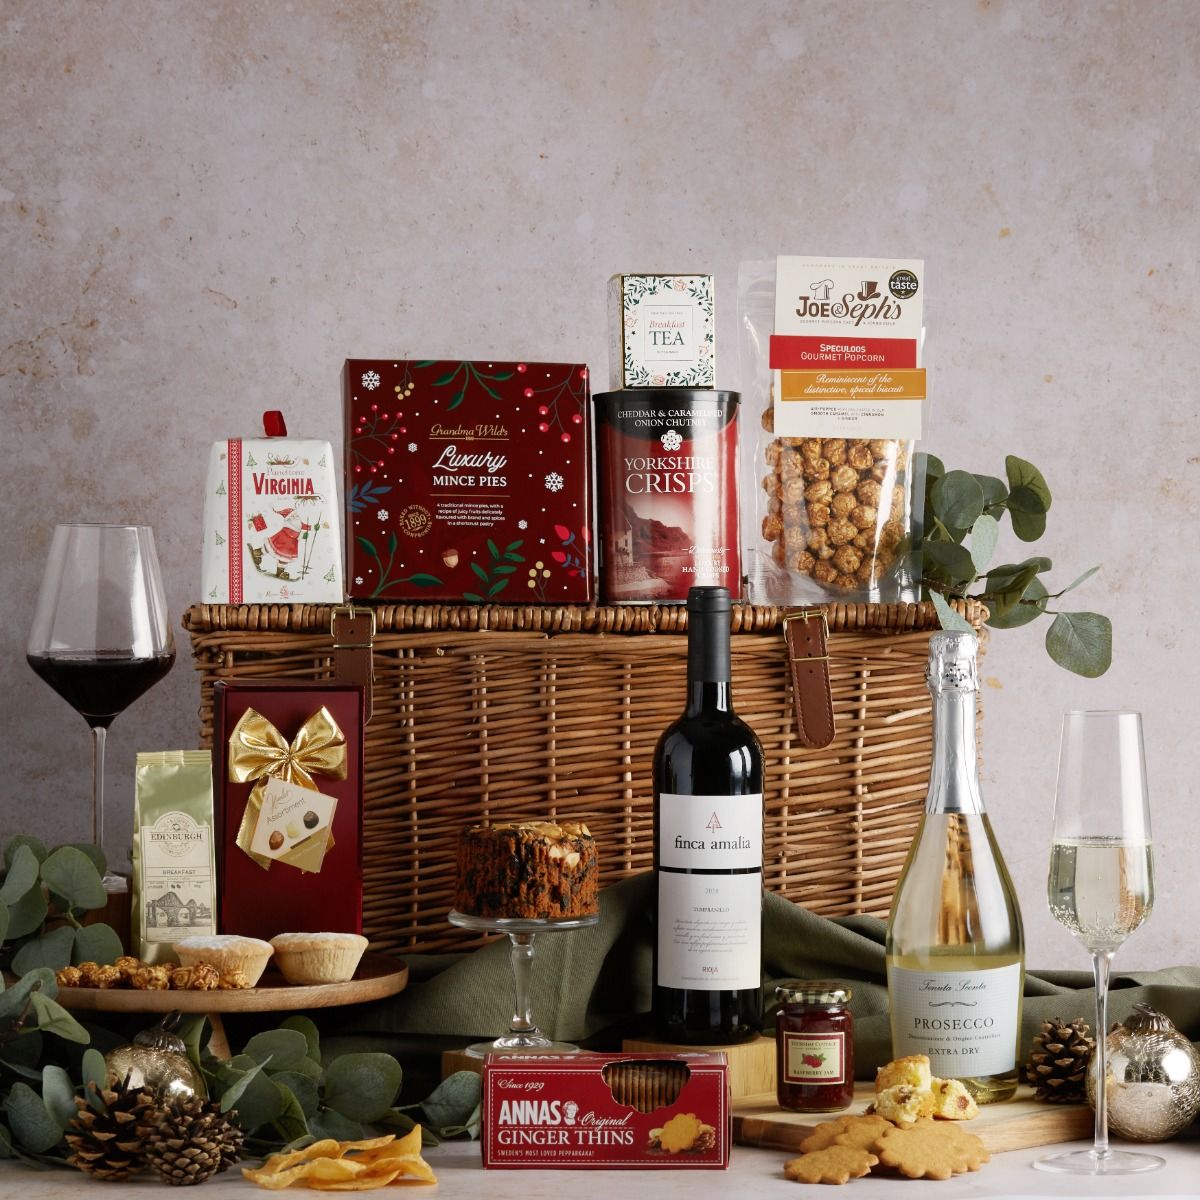 Luxury Bearing Gifts Hamper with contents on display with its wicker basket